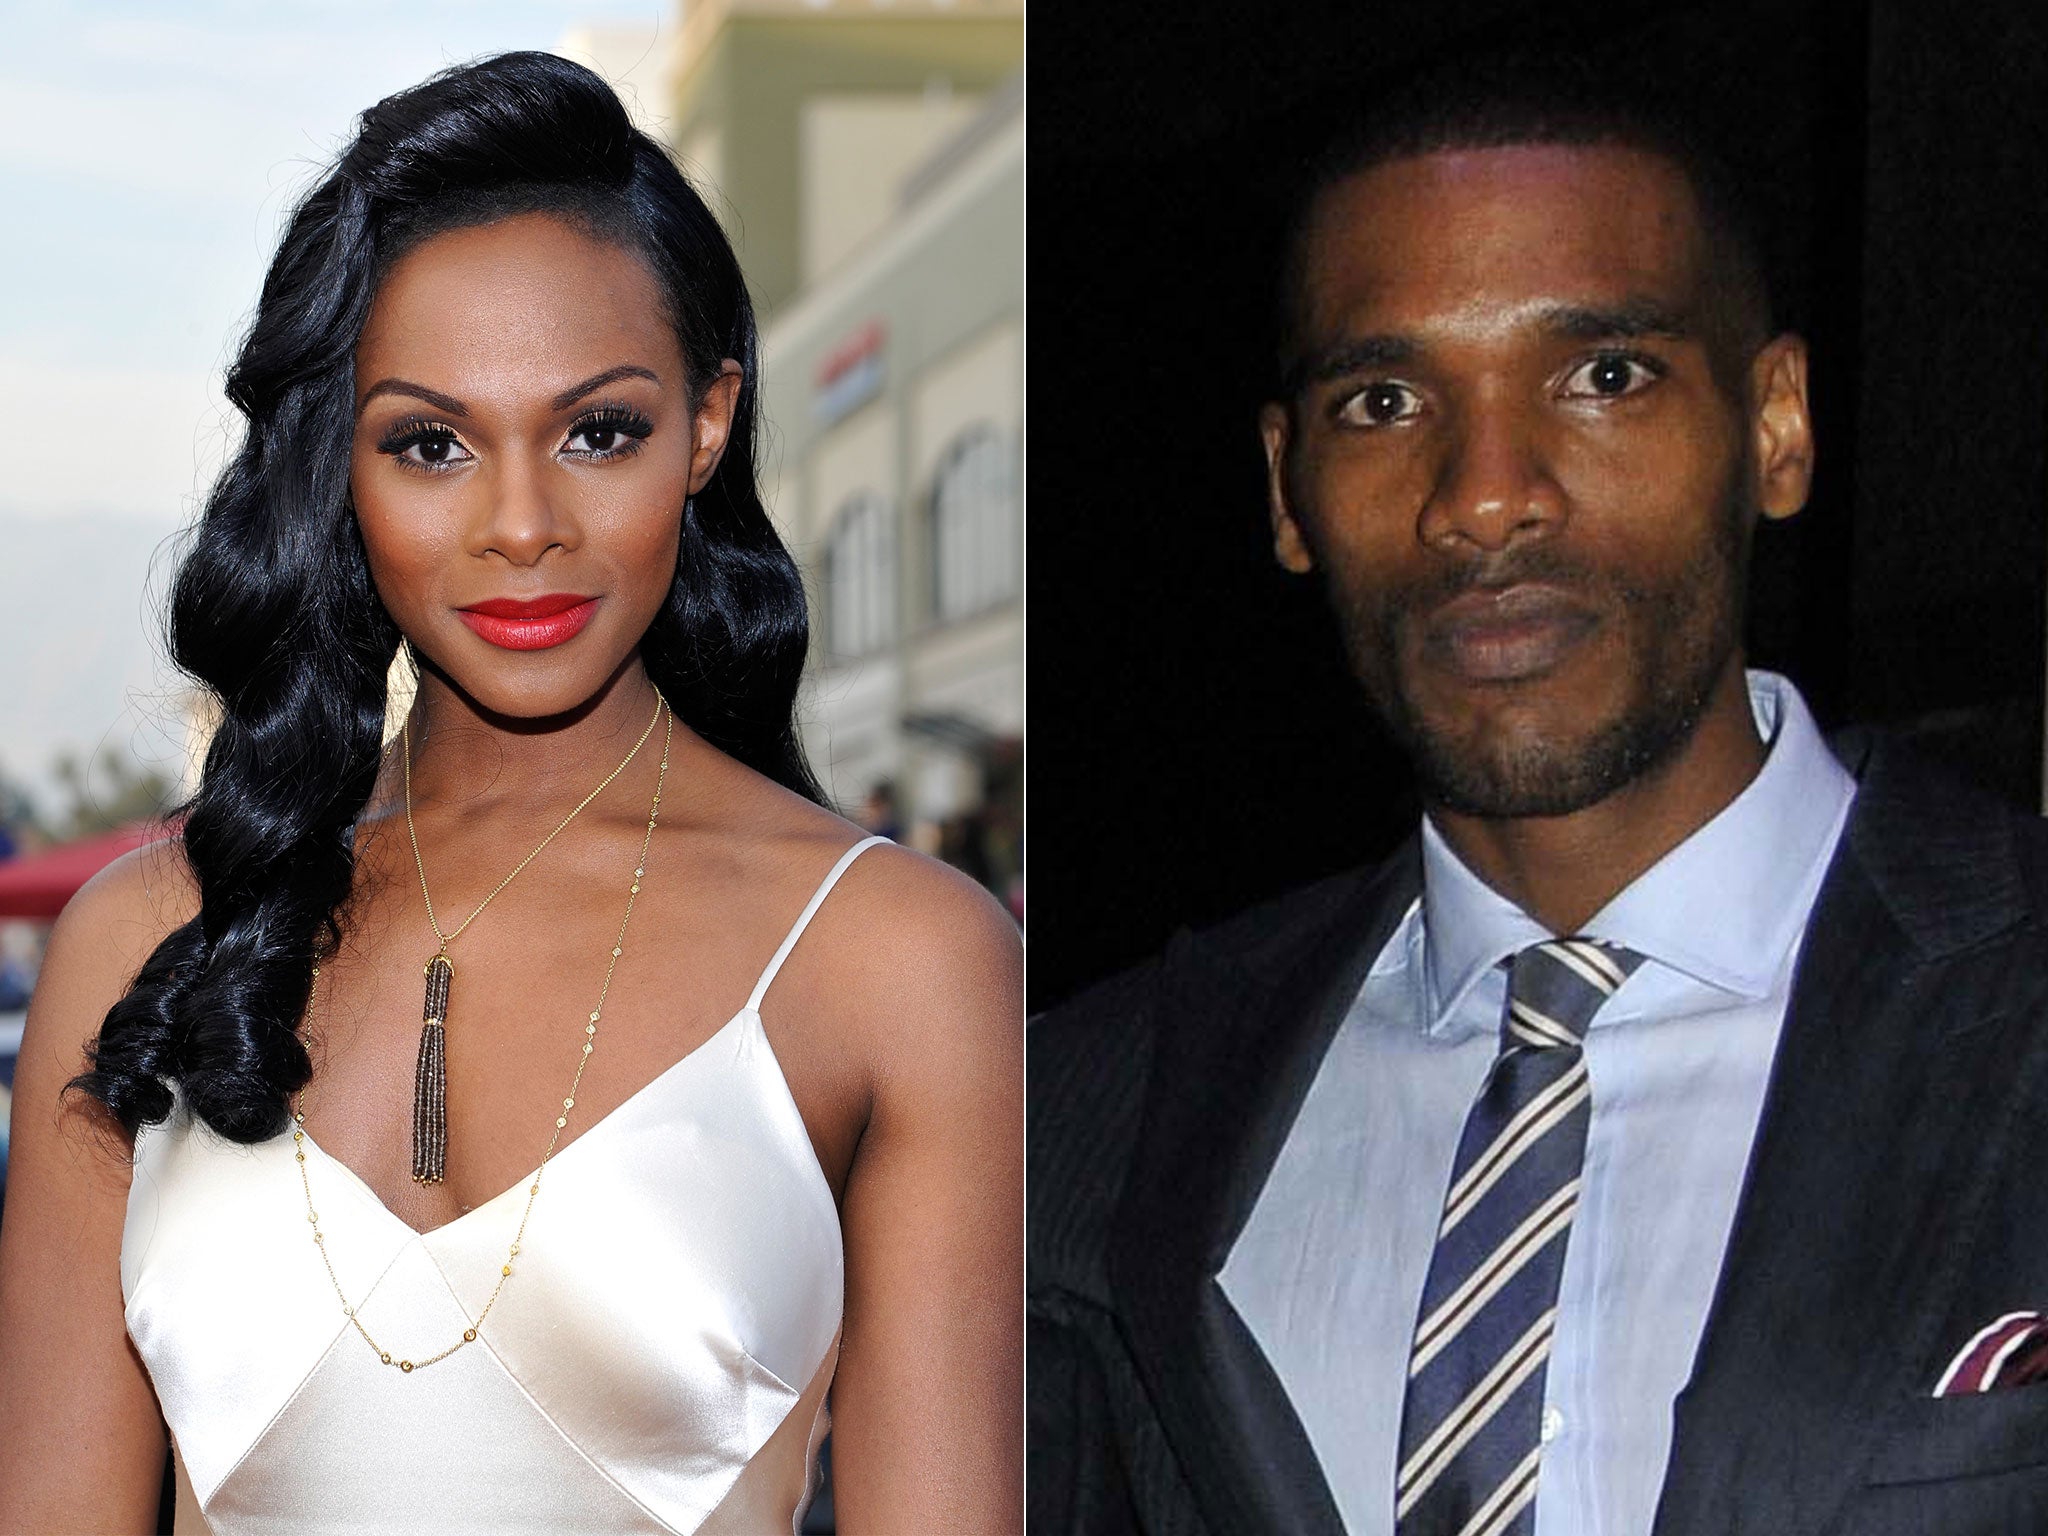 Tika Sumpter and Parker Sawyers will play Michelle and Barack Obama in Southside With You